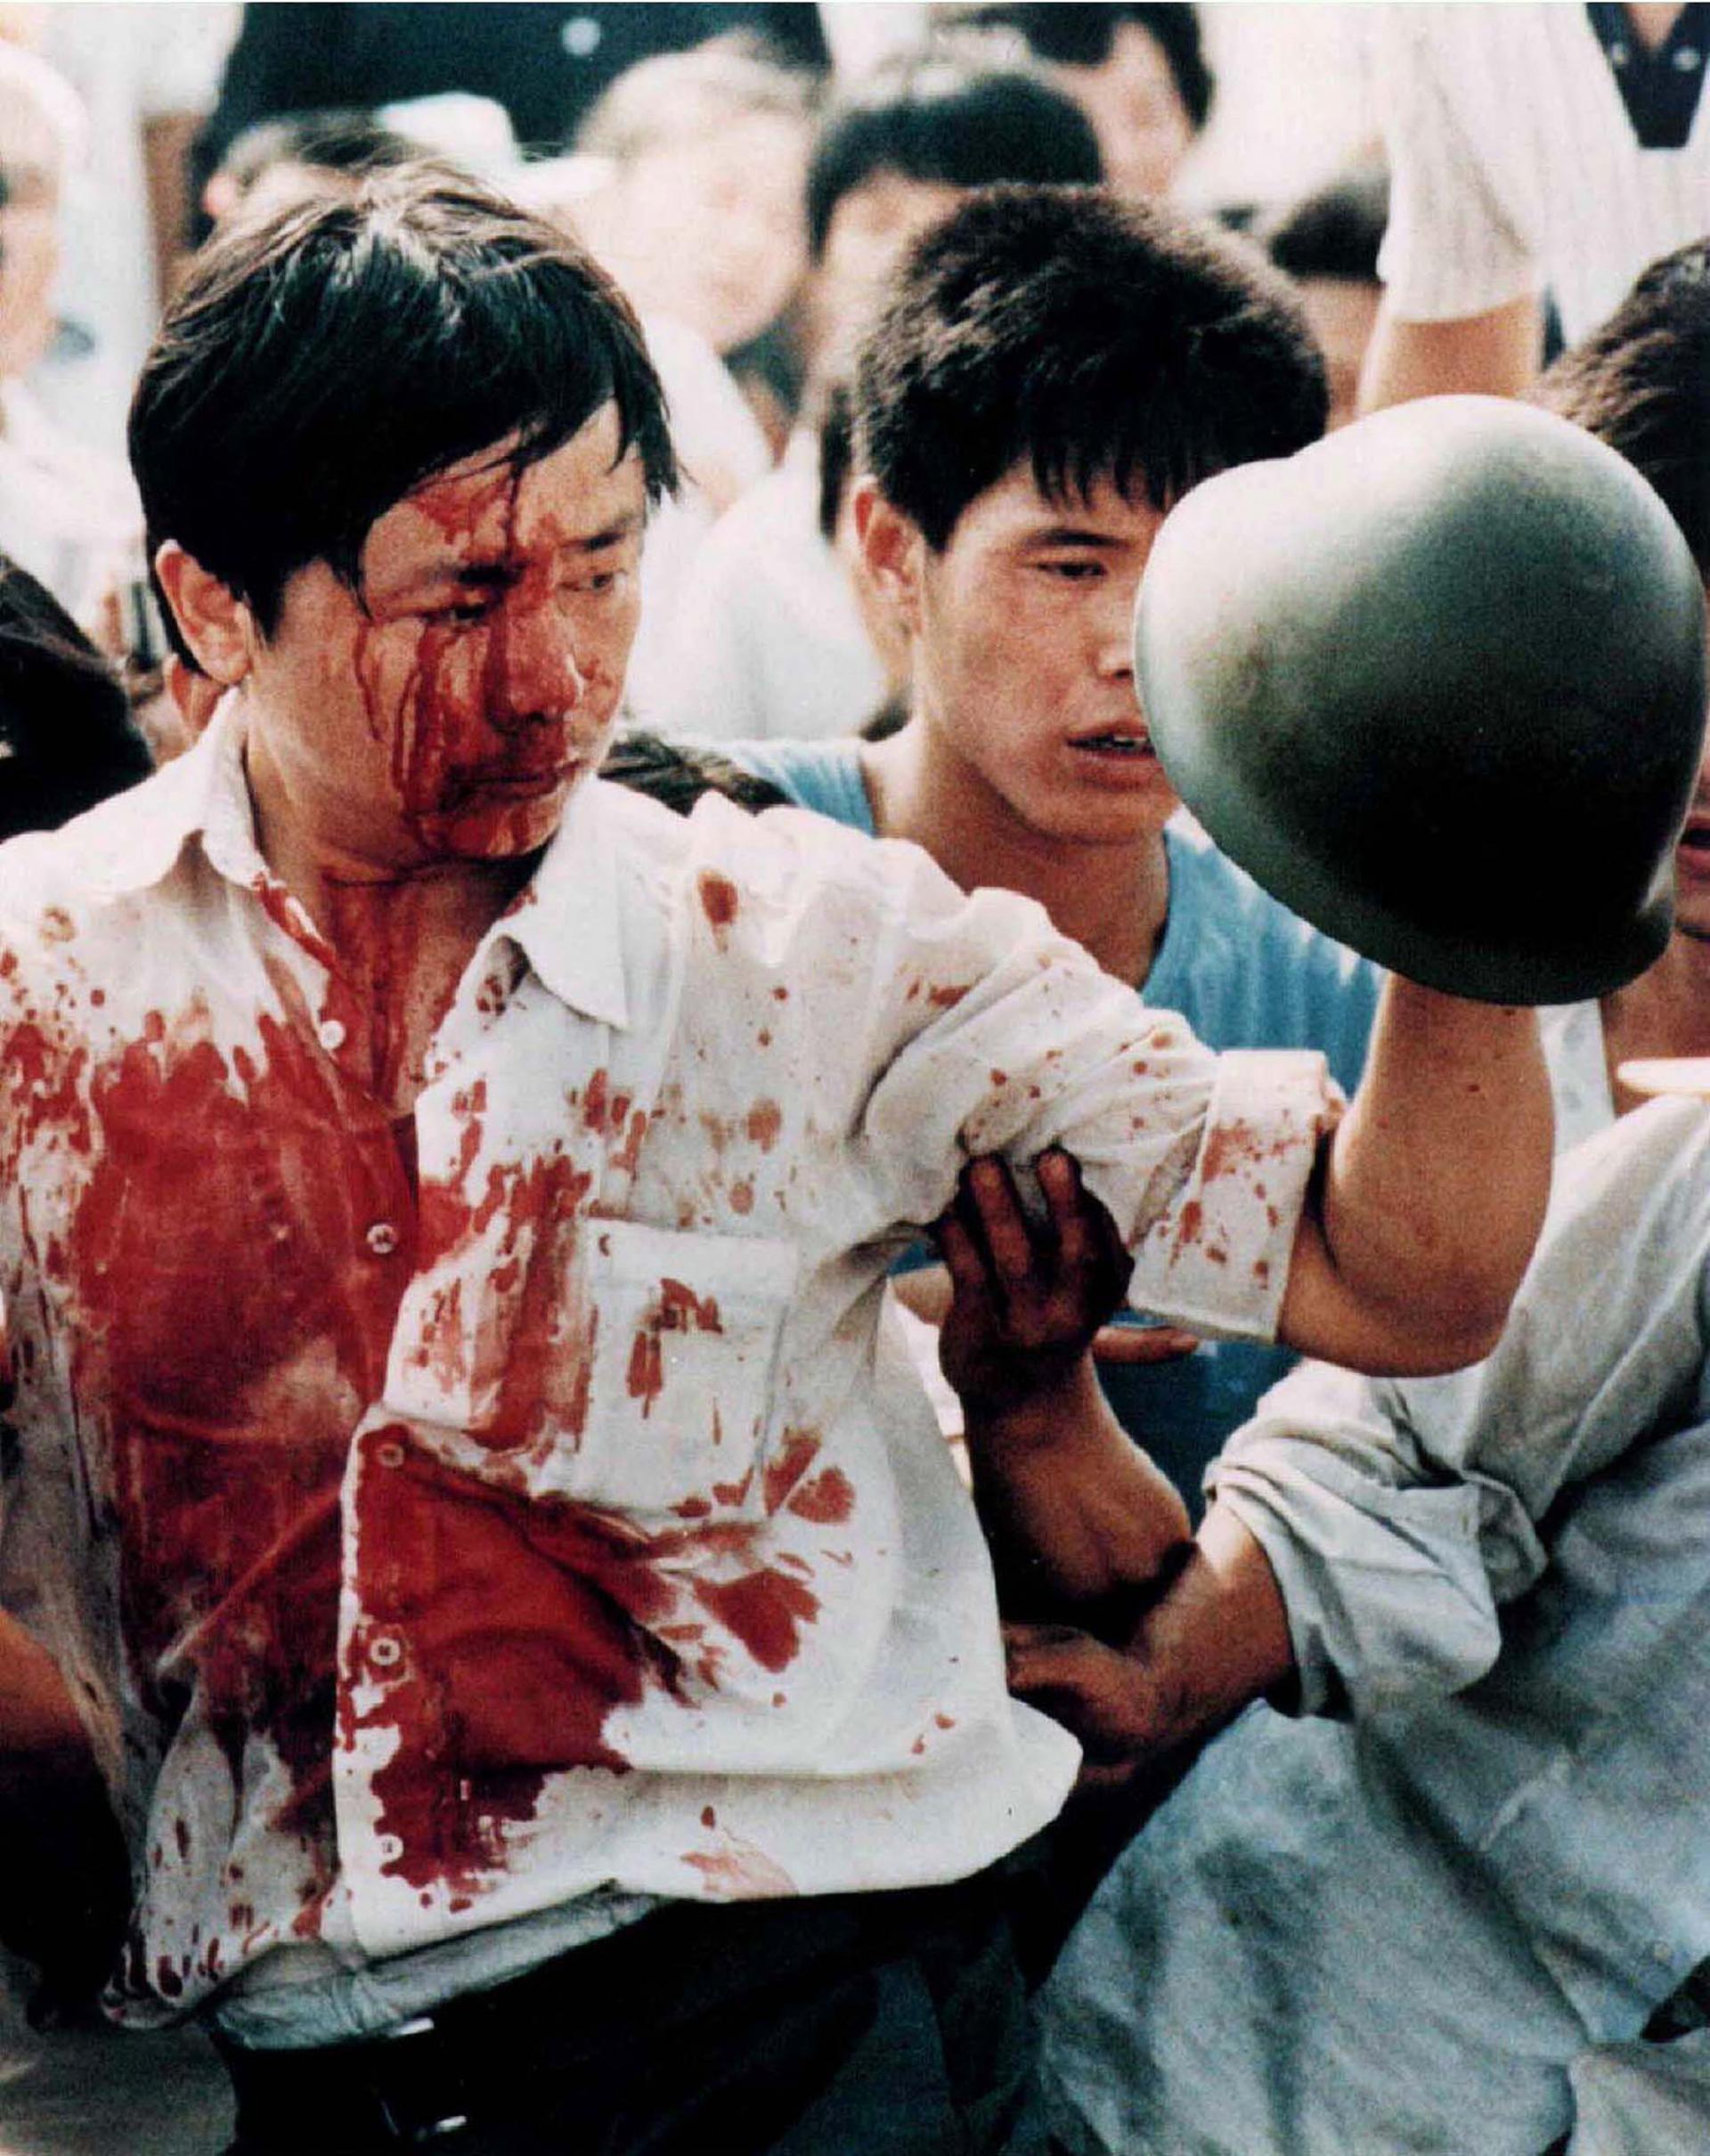 A man is covered in blood while holding up a military helmet. 